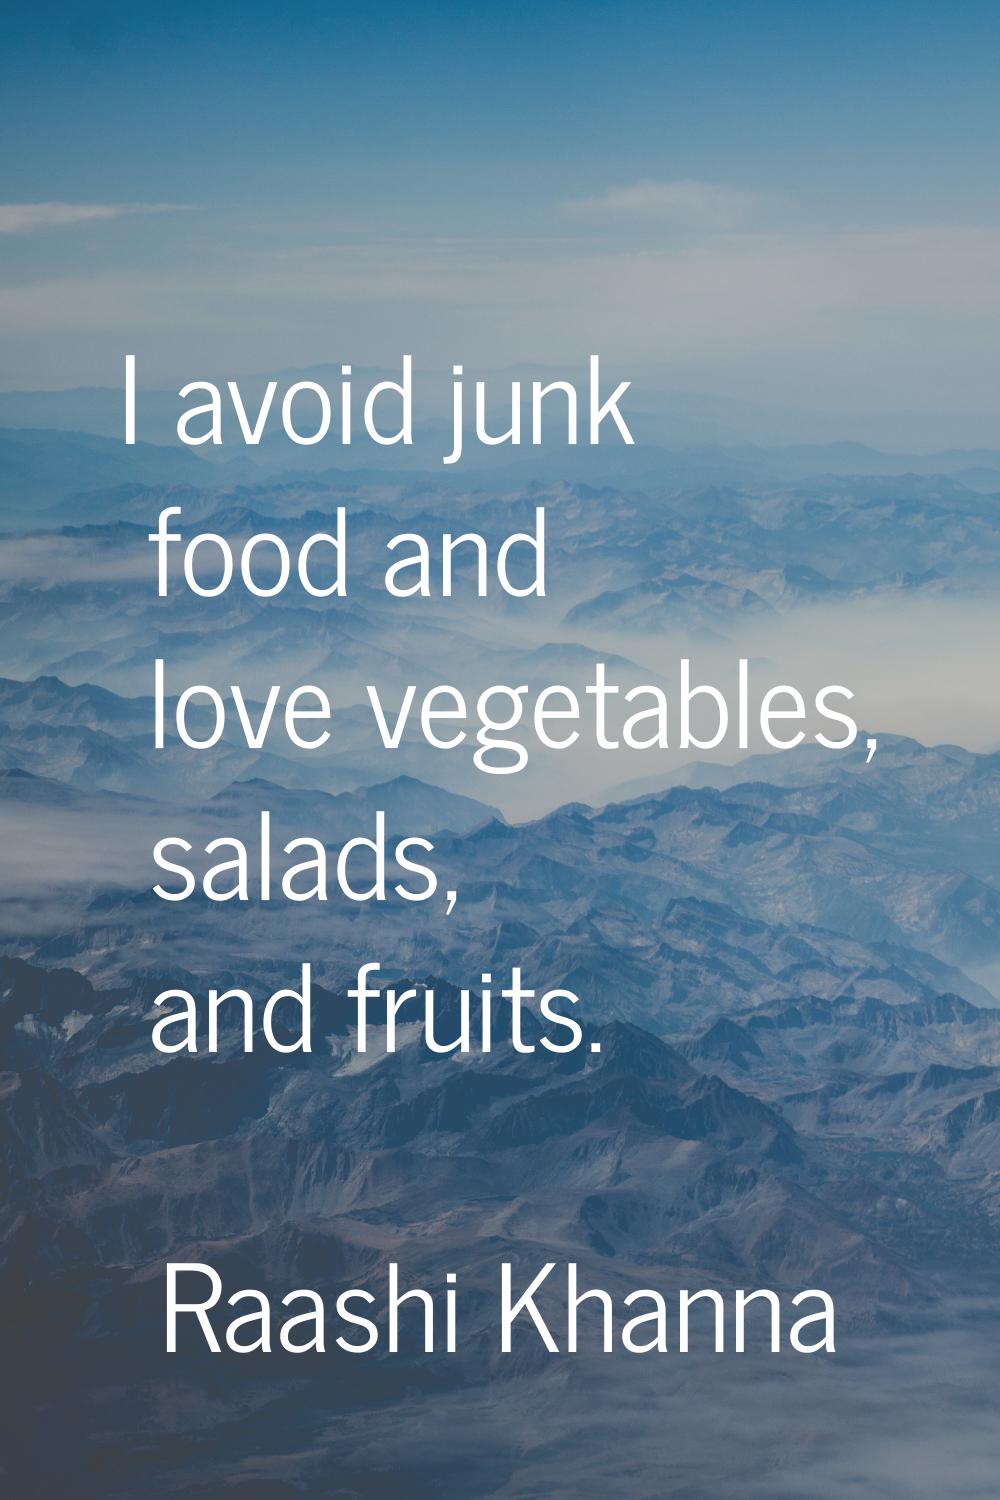 I avoid junk food and love vegetables, salads, and fruits.